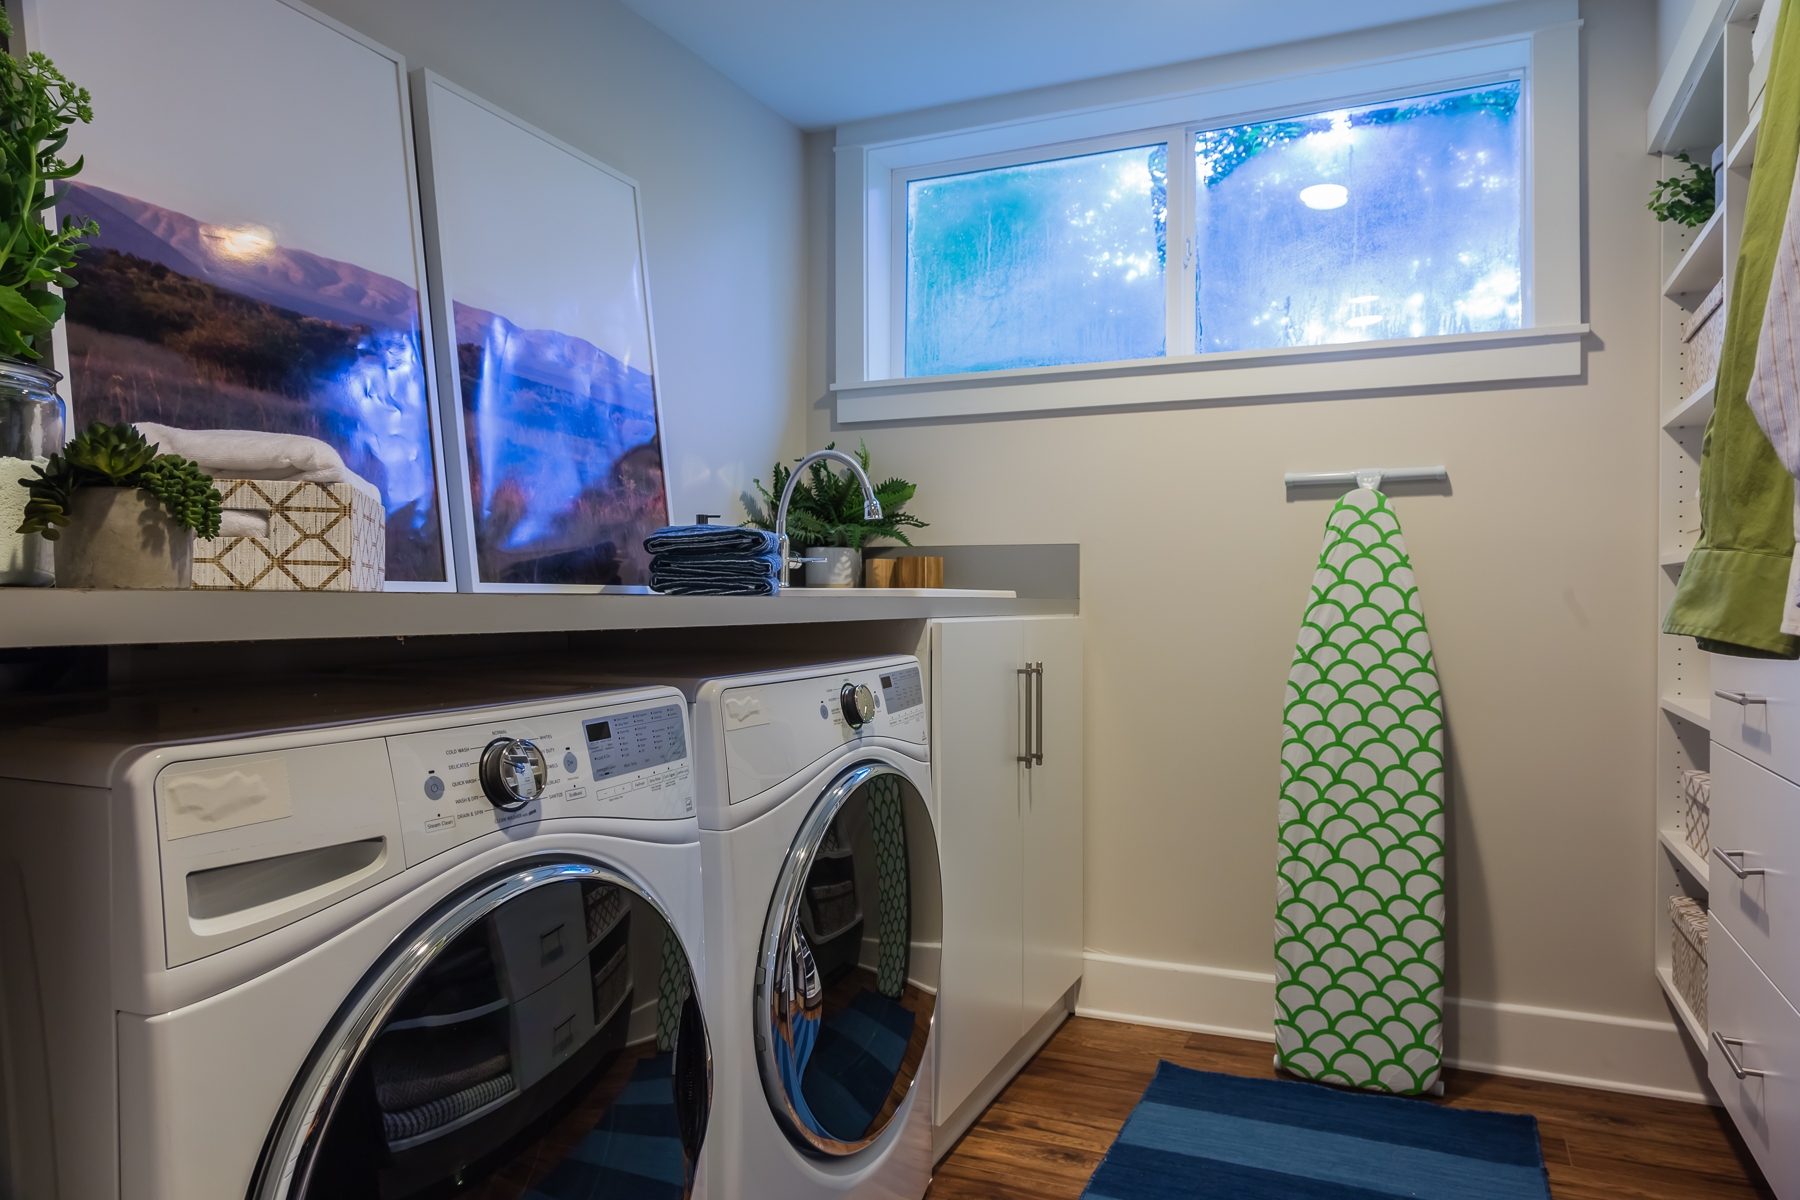 A New Laundry Room